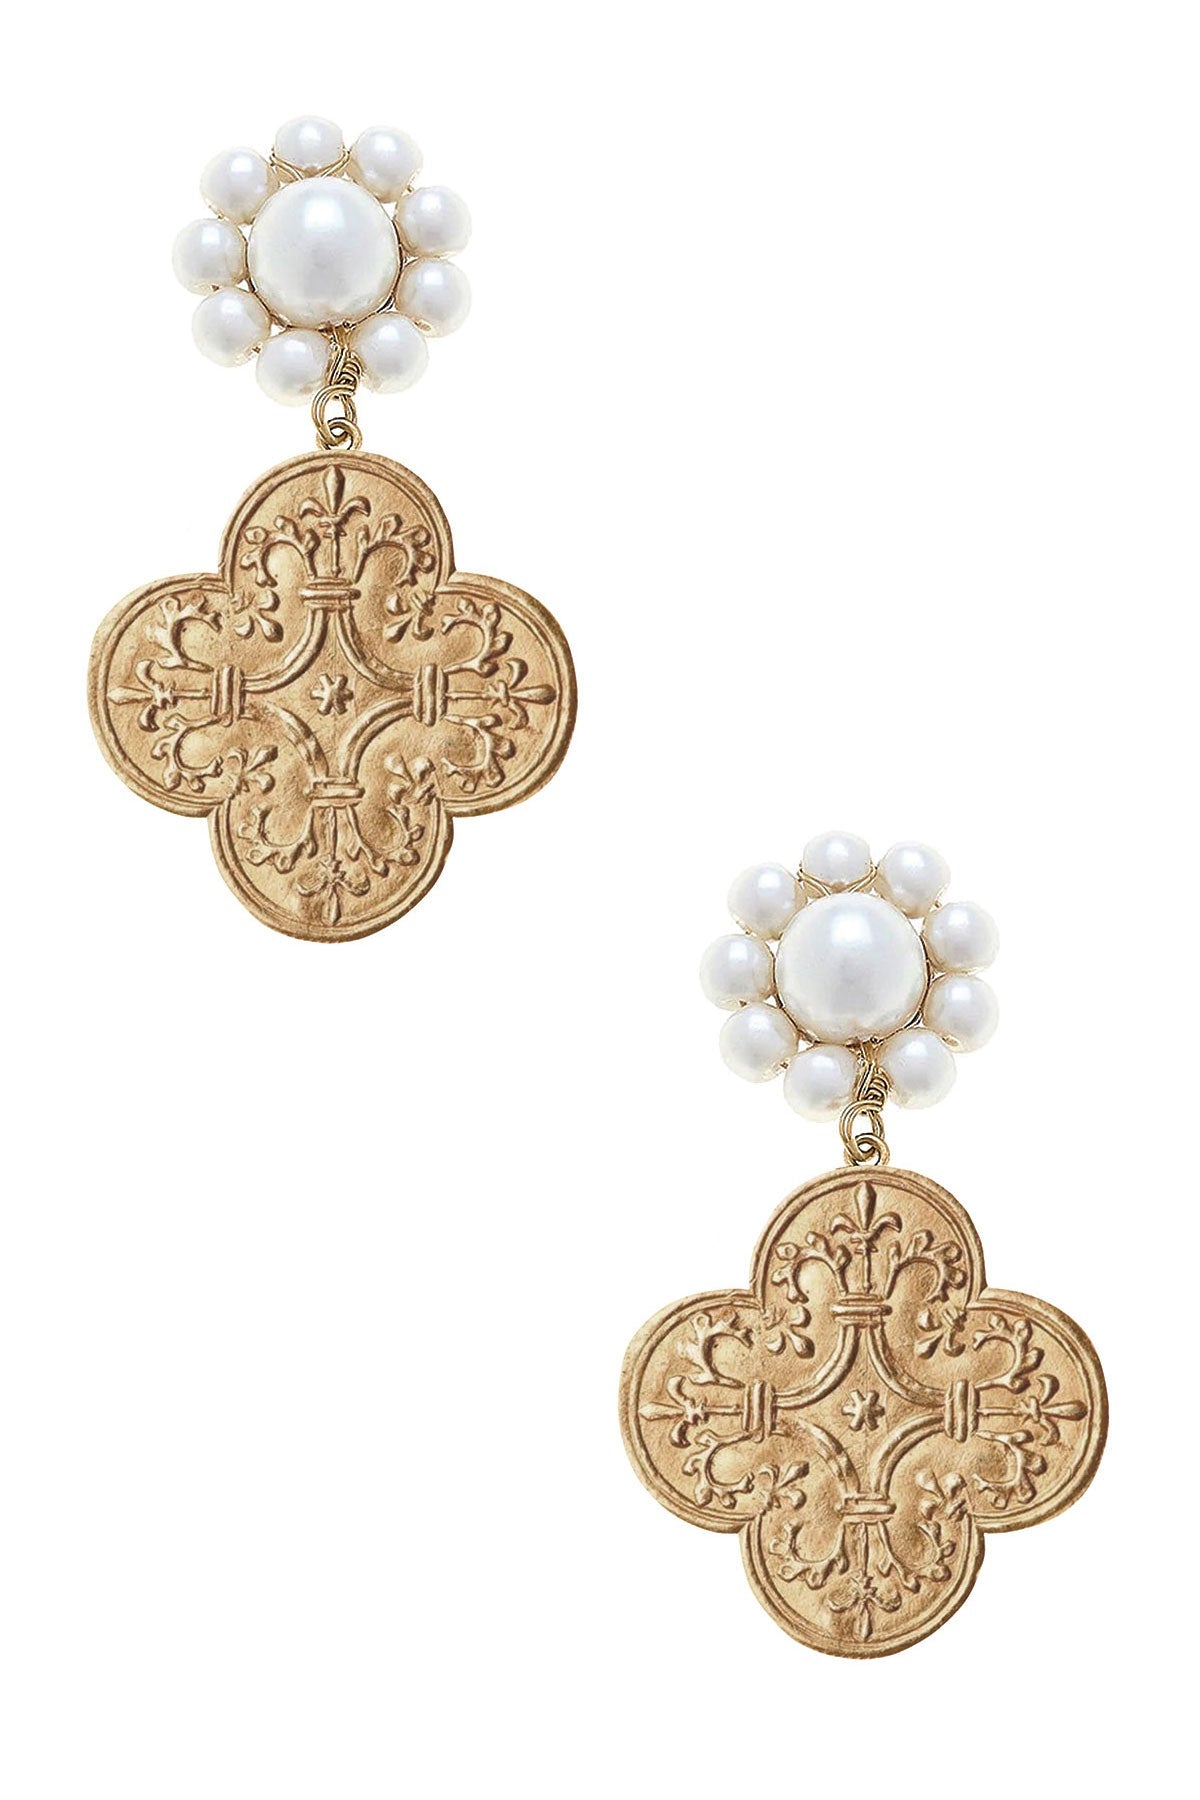 CANVAS Style x MaryCatherineStudio French Quatrefoil Pearl Drop Earrings in Worn Gold